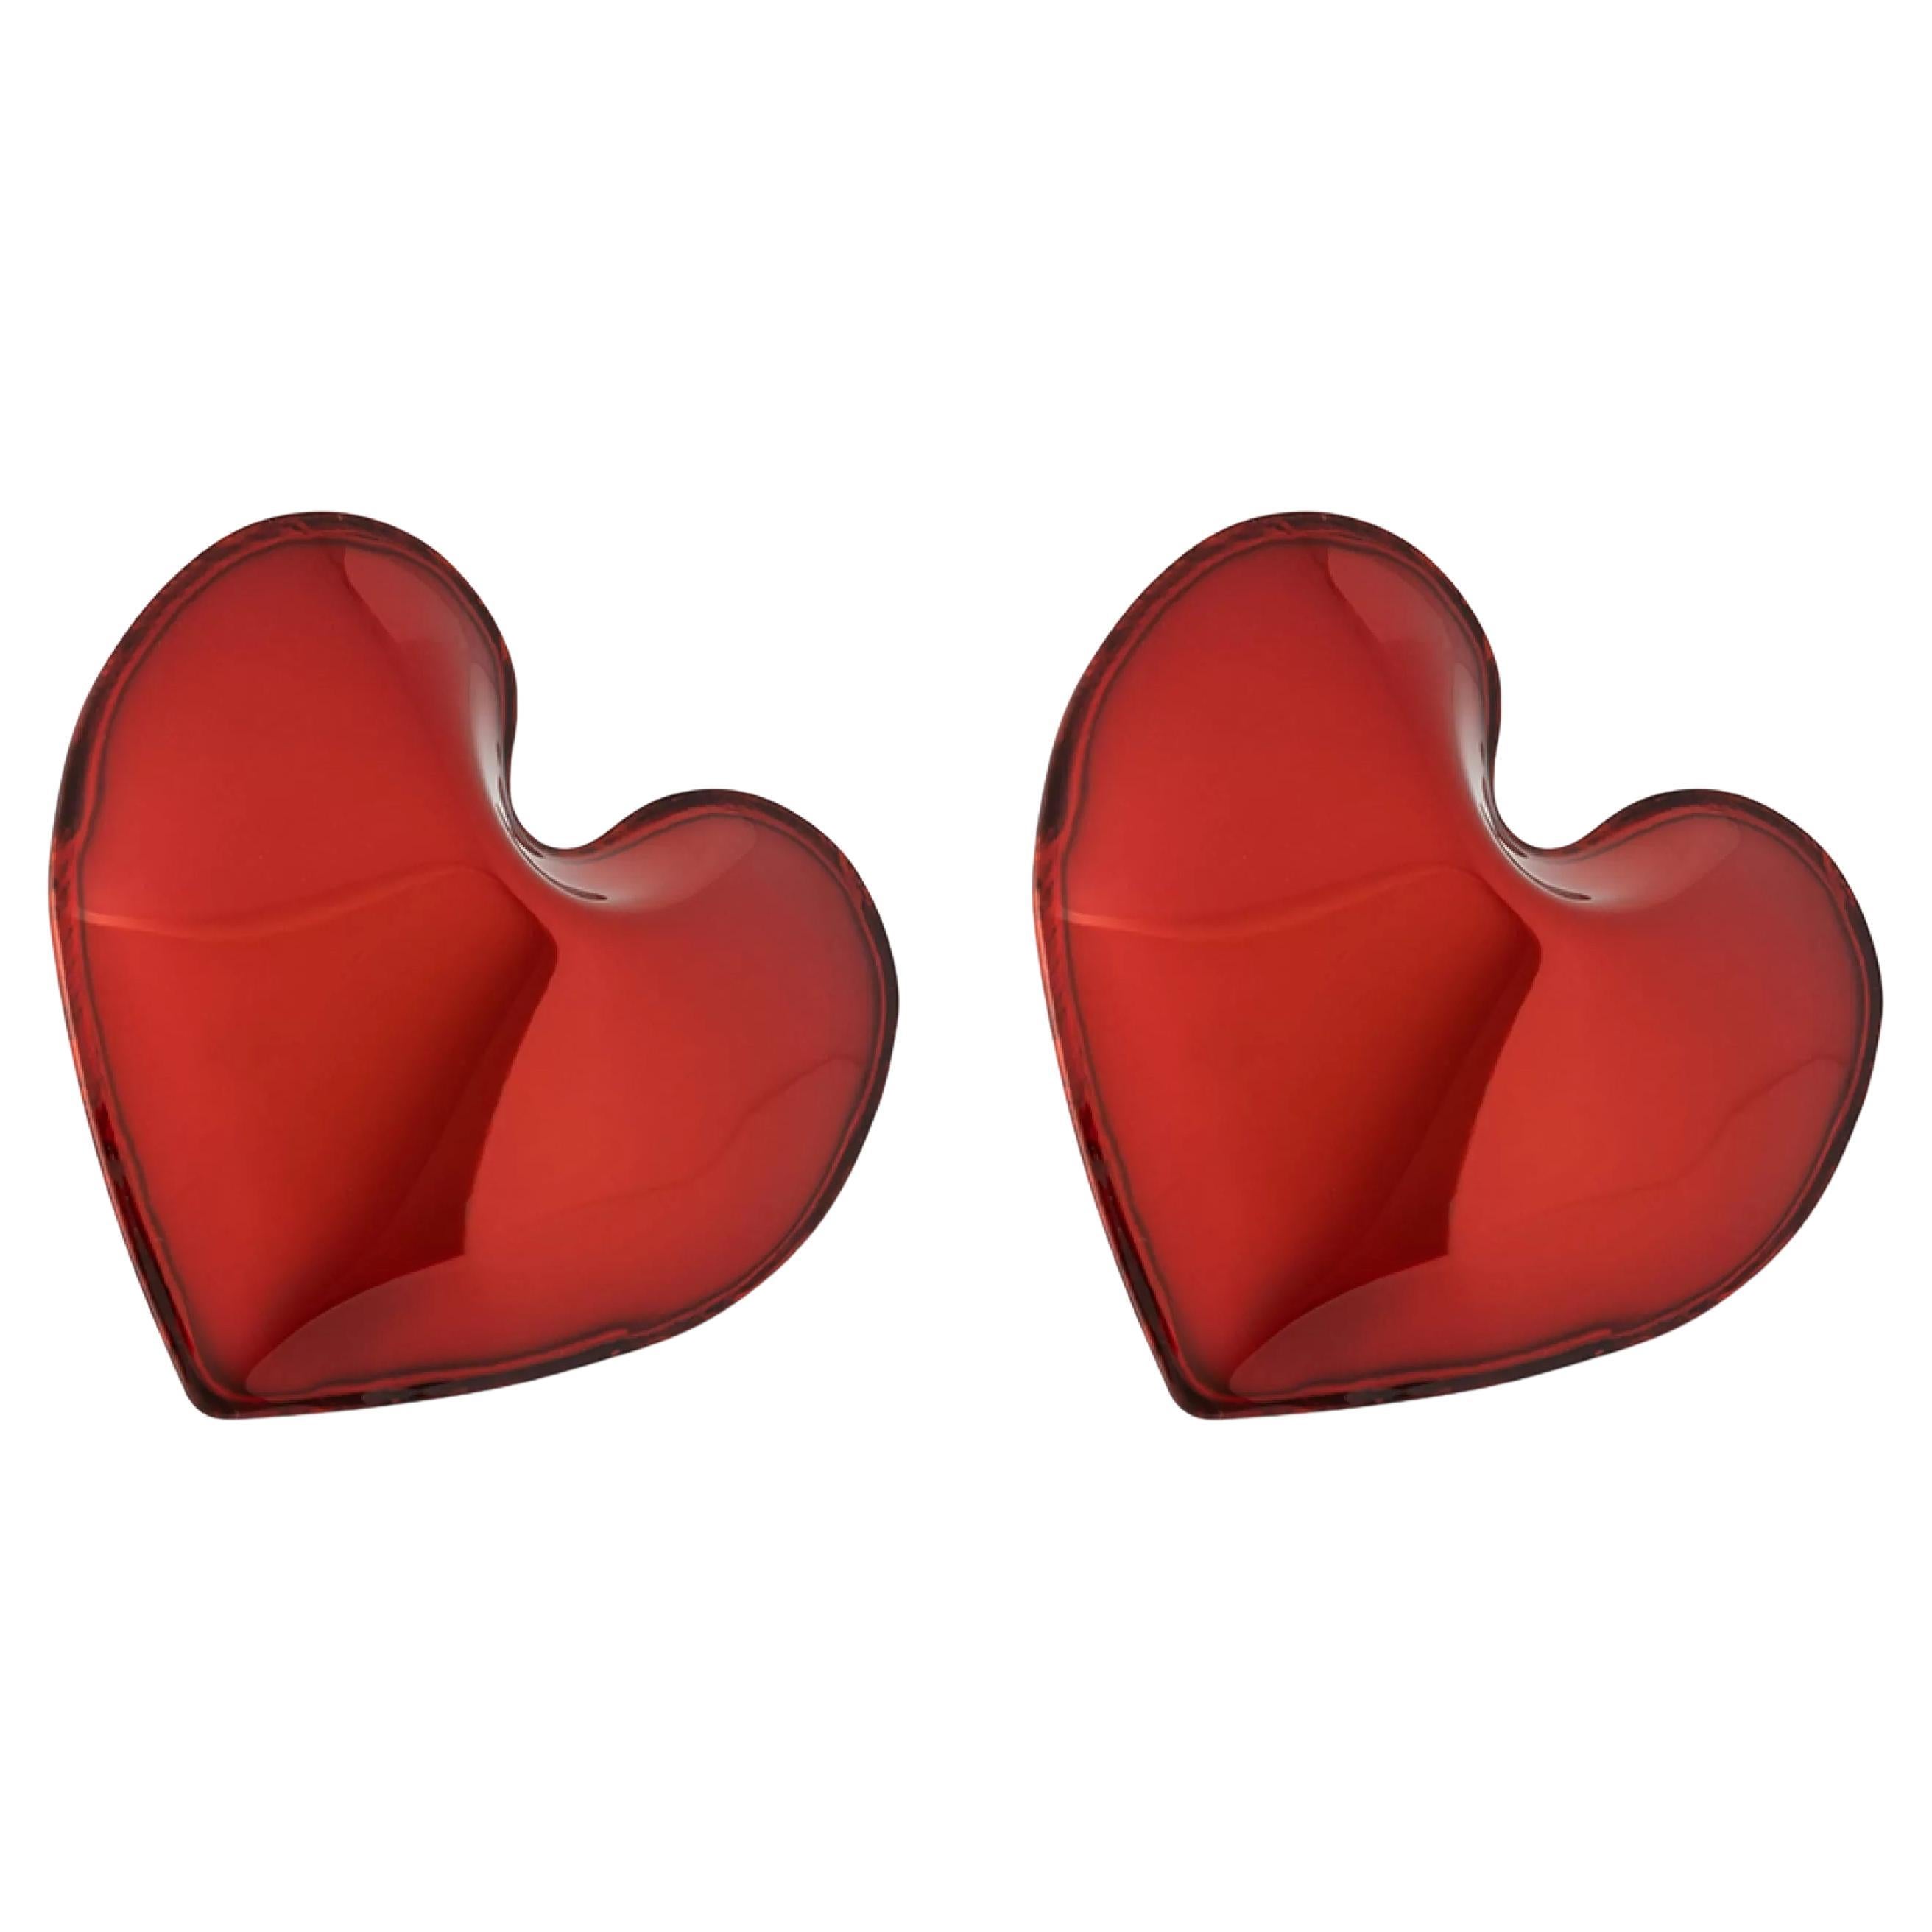 Set of 2 True Red Heart Inflated Hangers by Zieta For Sale